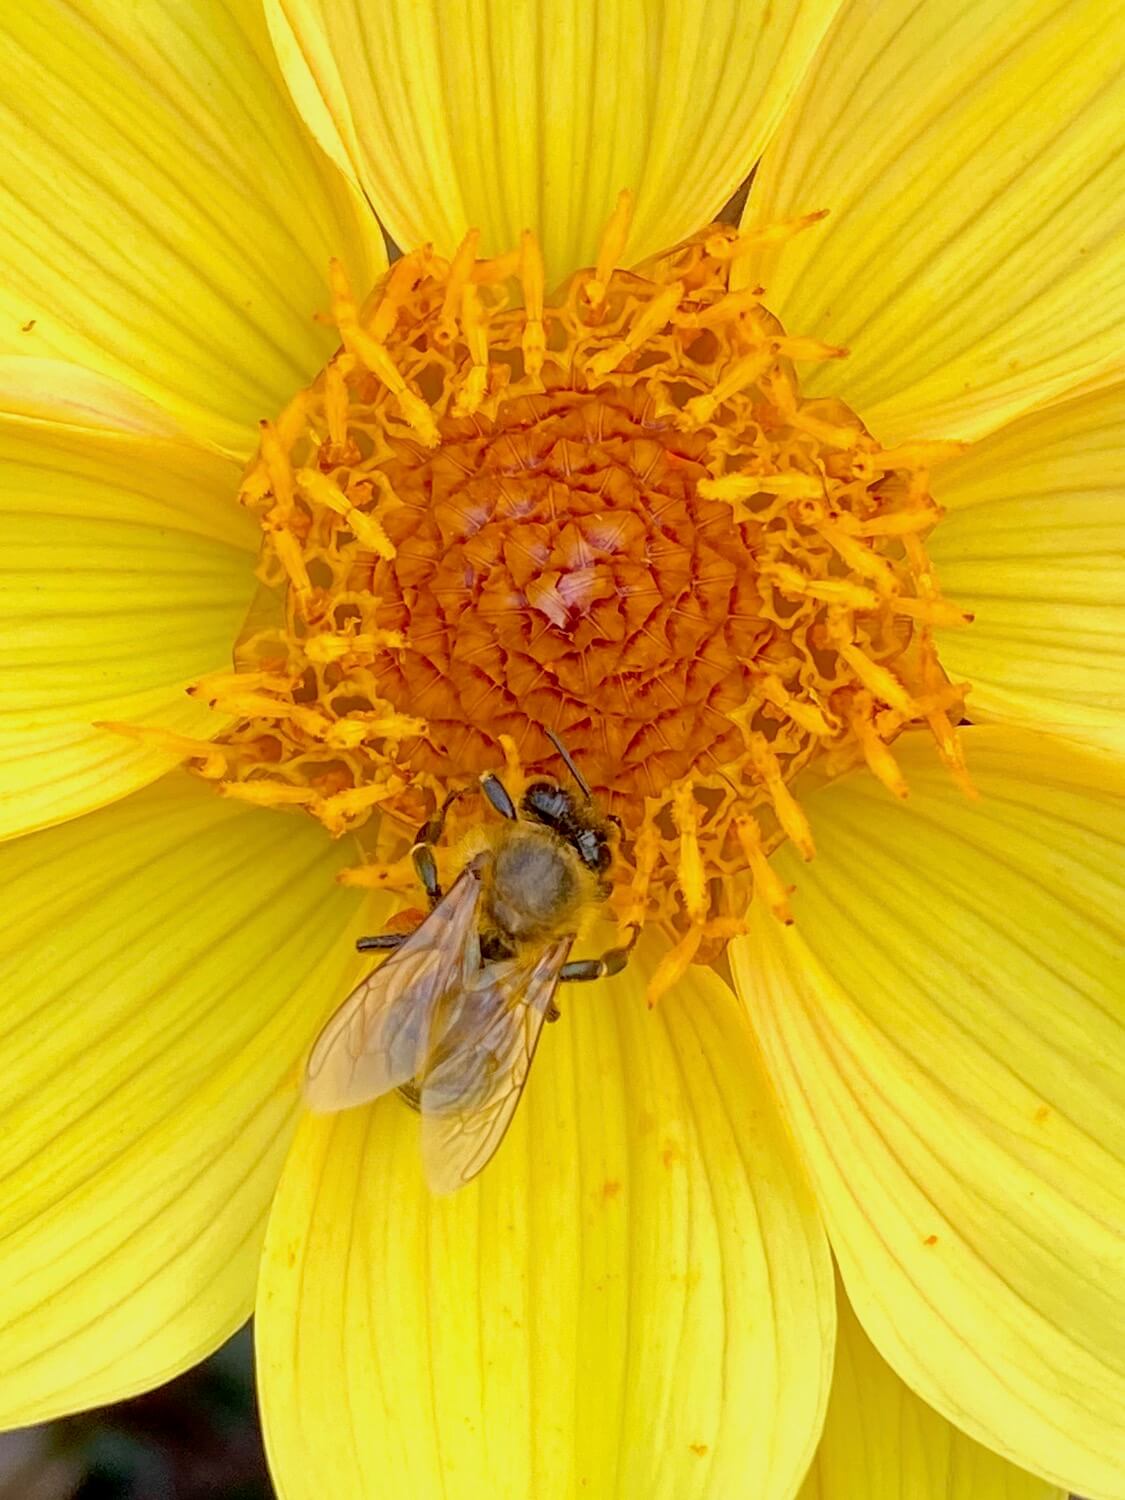 A bee with delicate champagne colored wings busily investigates the center of a yellow flower bloom in the P-Patch garden. The inner core of the bloom has tight honeycomb stamen while the larger pedals are variegated yellow.